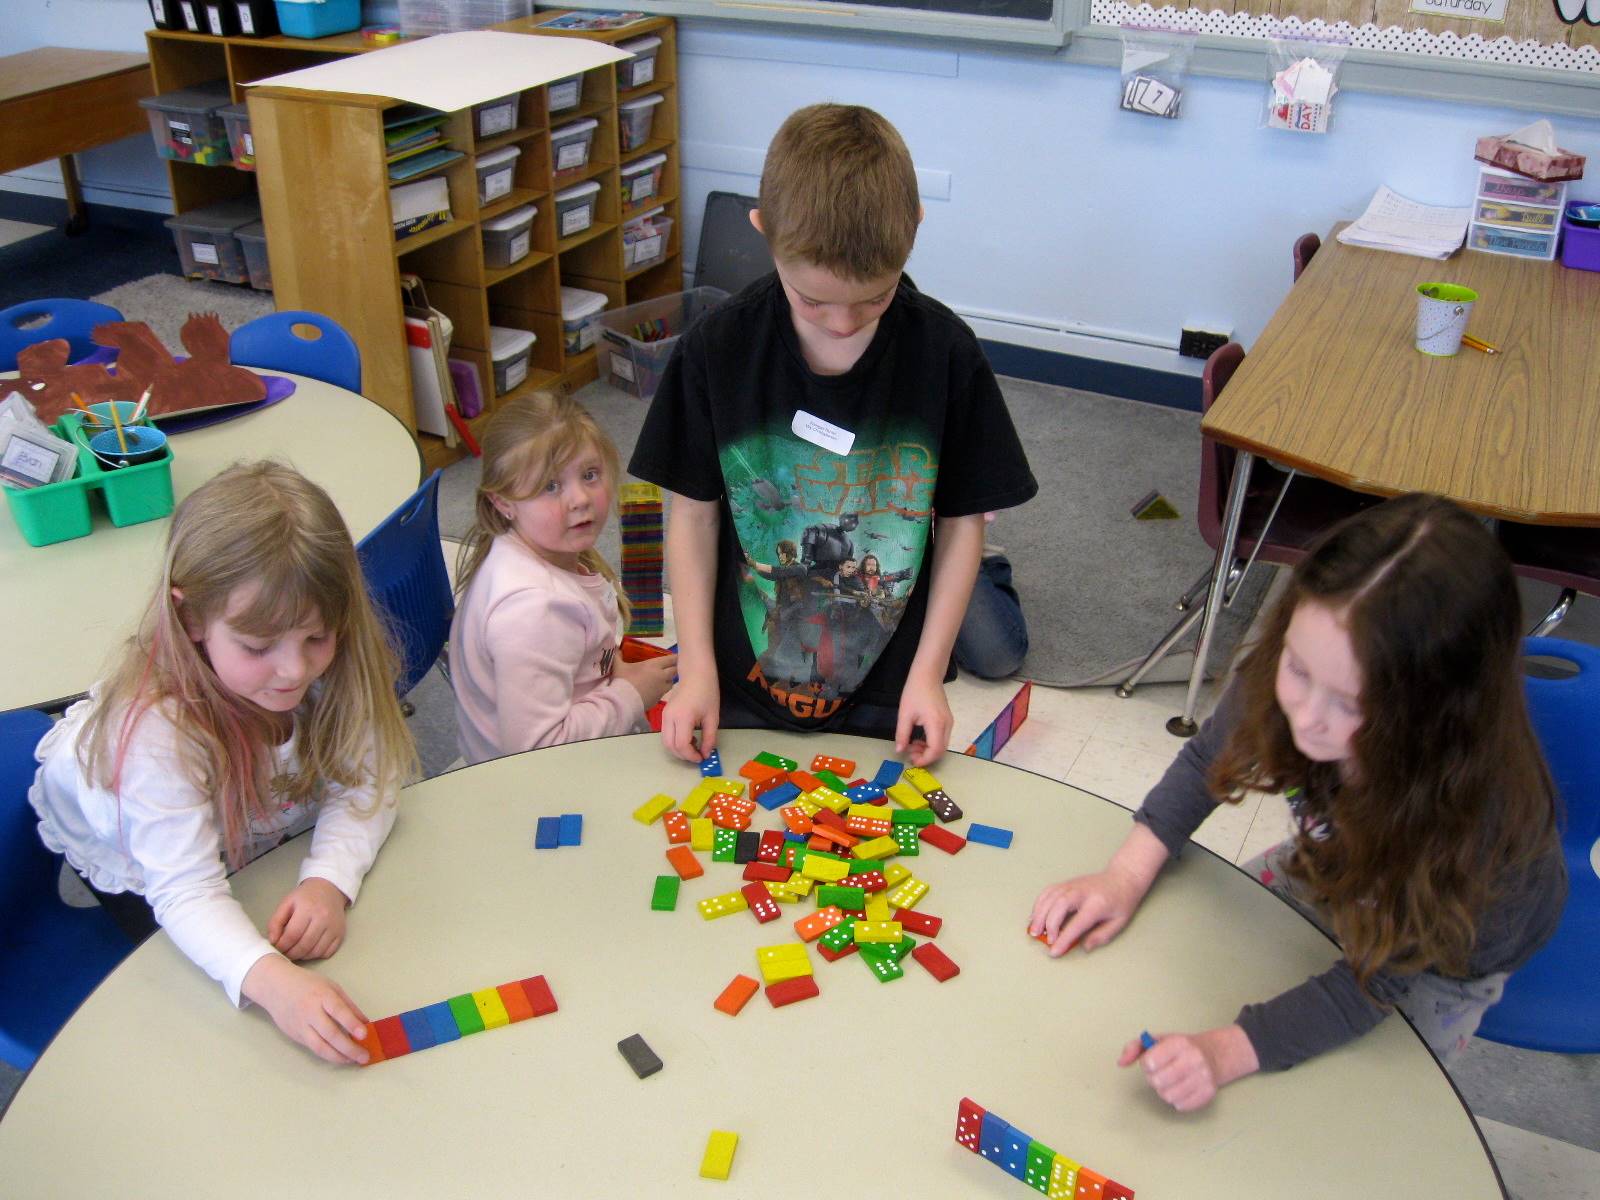 4 students build with colored blocks.